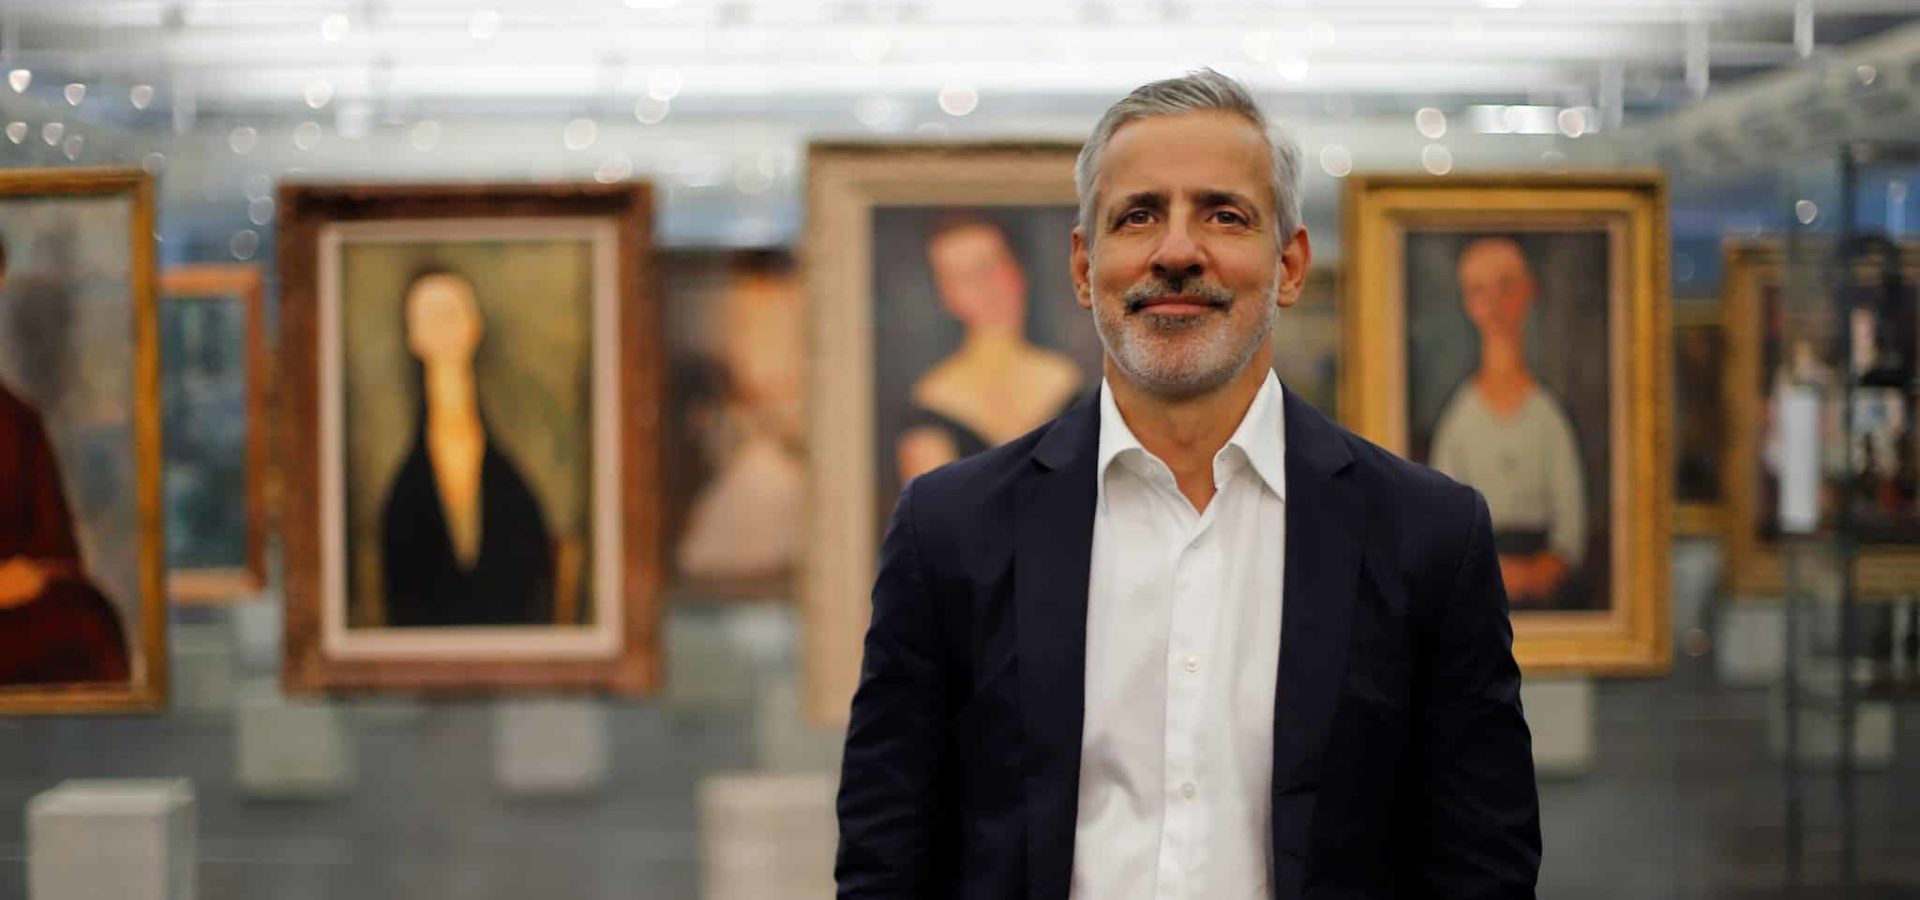 Adriano Pedrosa stands smiling in gallery setting featuring hanging paintings